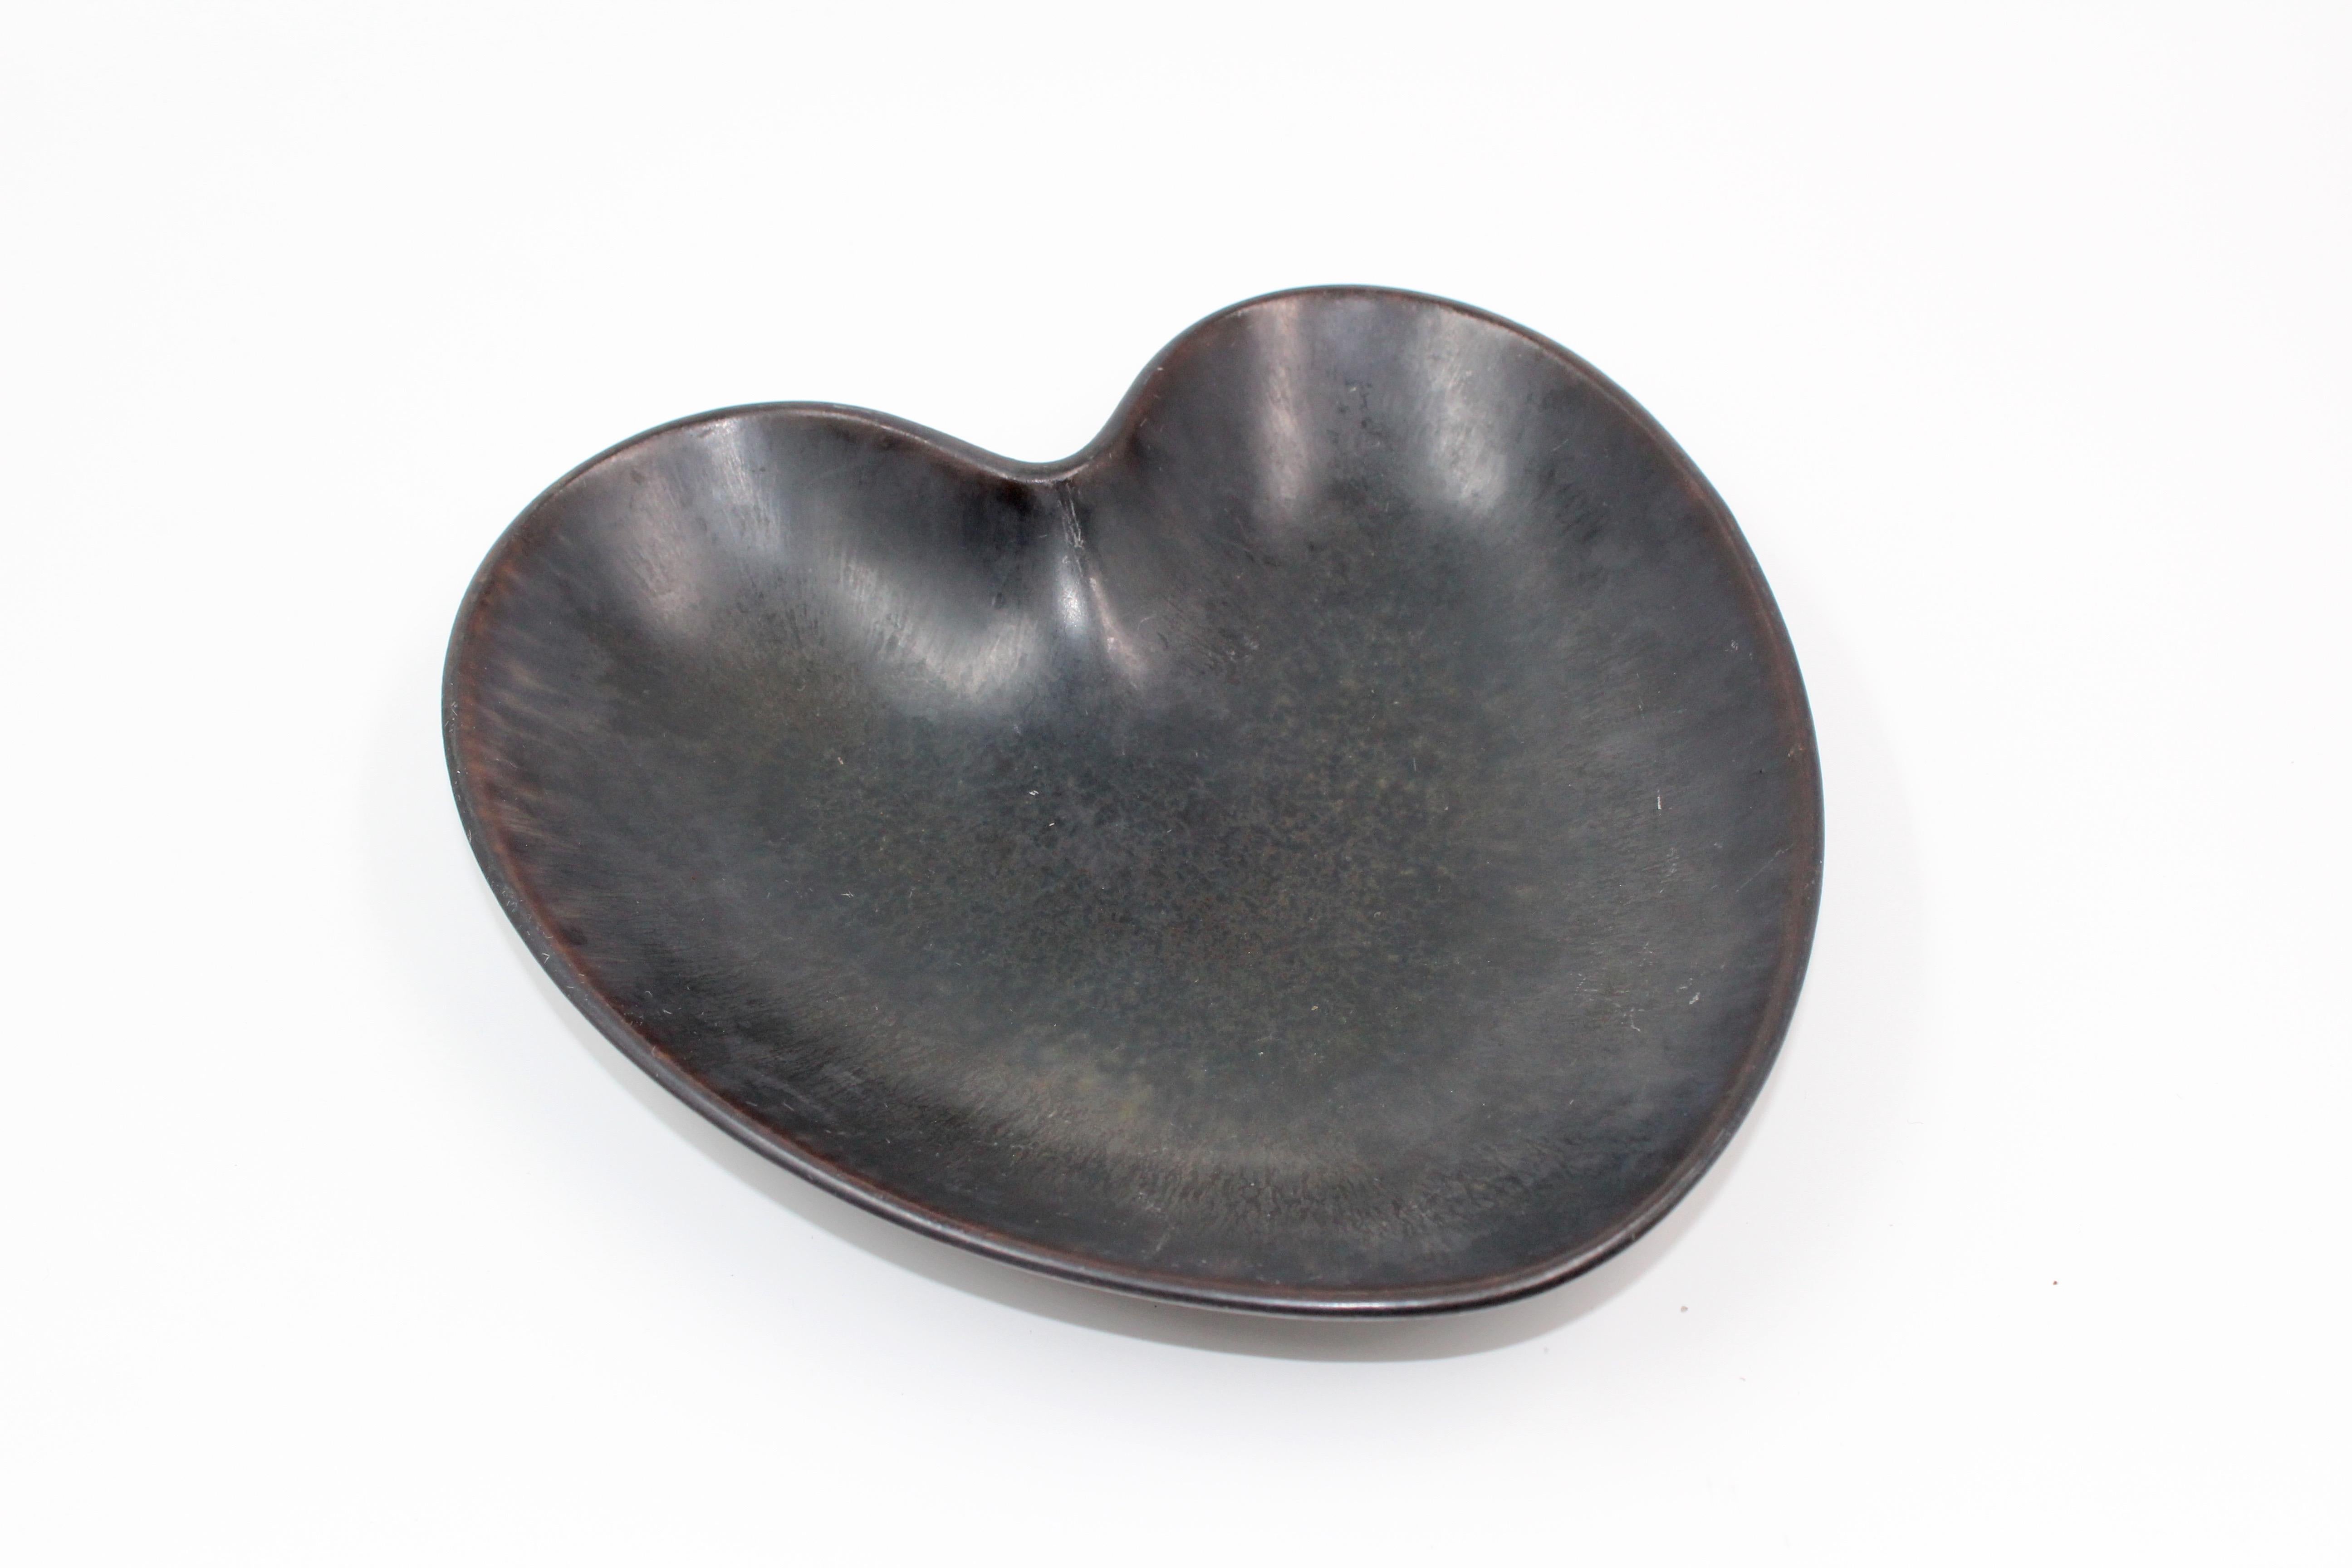 Midcentury Heart-Shaped Ceramic Bowls by Gunnar Nylund 'Set of 3', 1950s In Good Condition For Sale In Malmo, SE